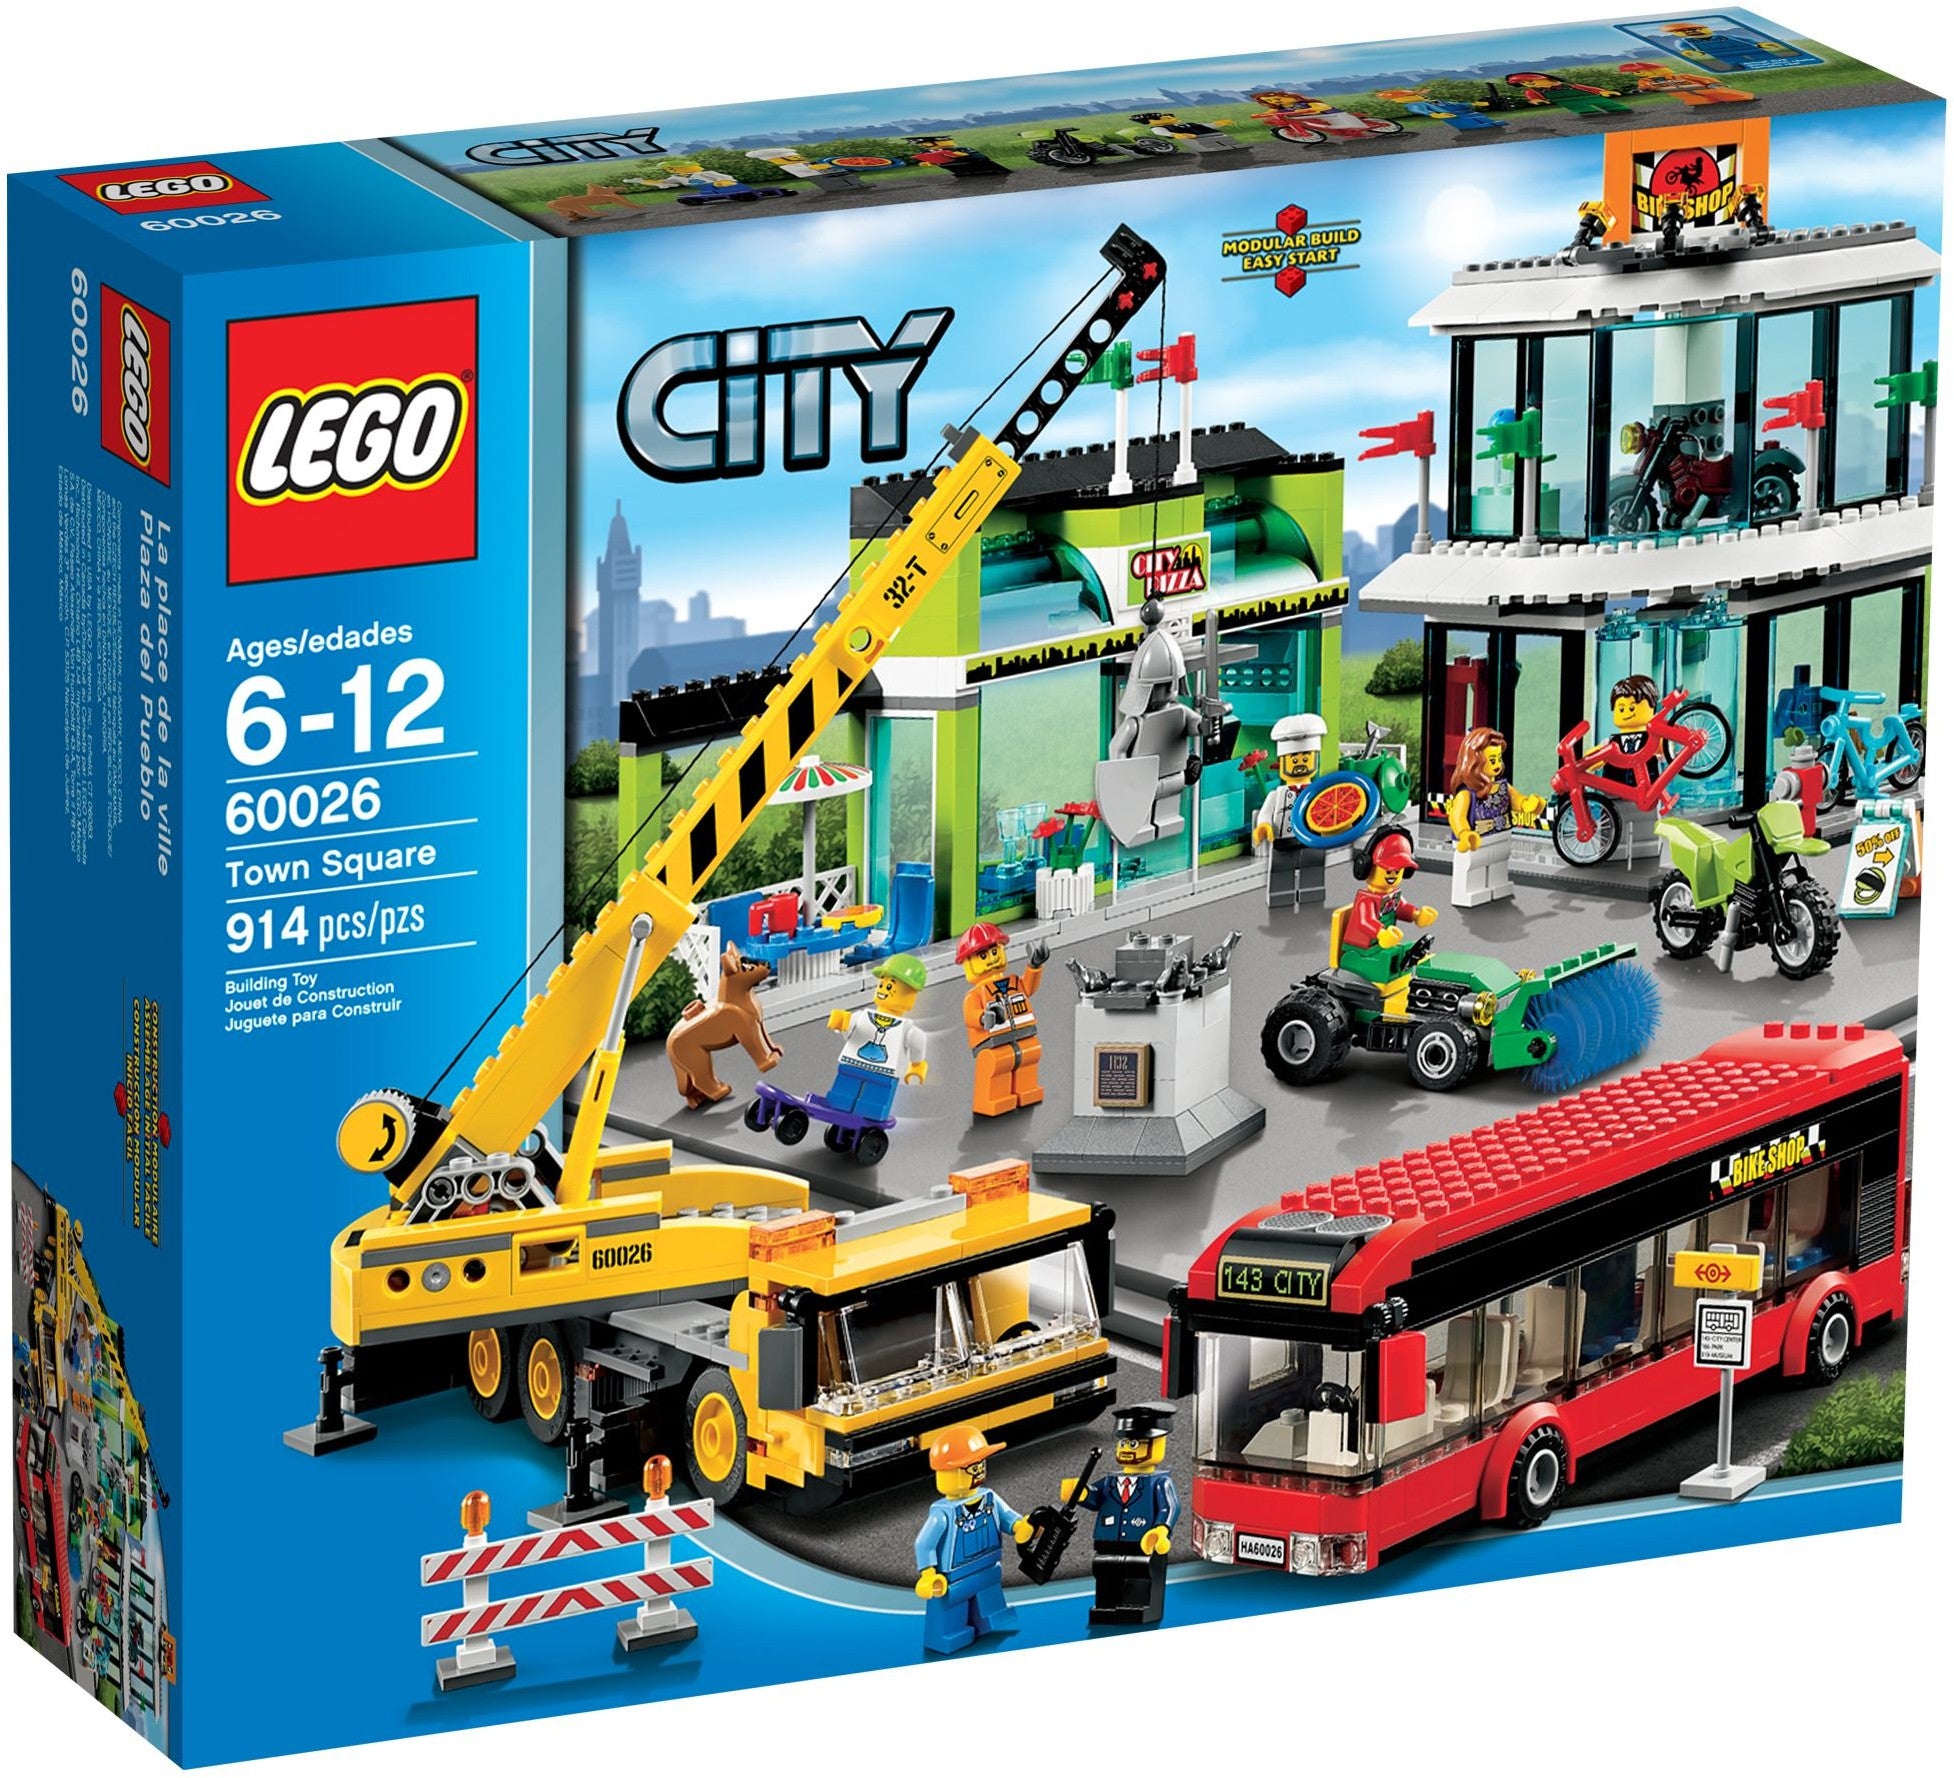 Lego City 60026 - Town Square